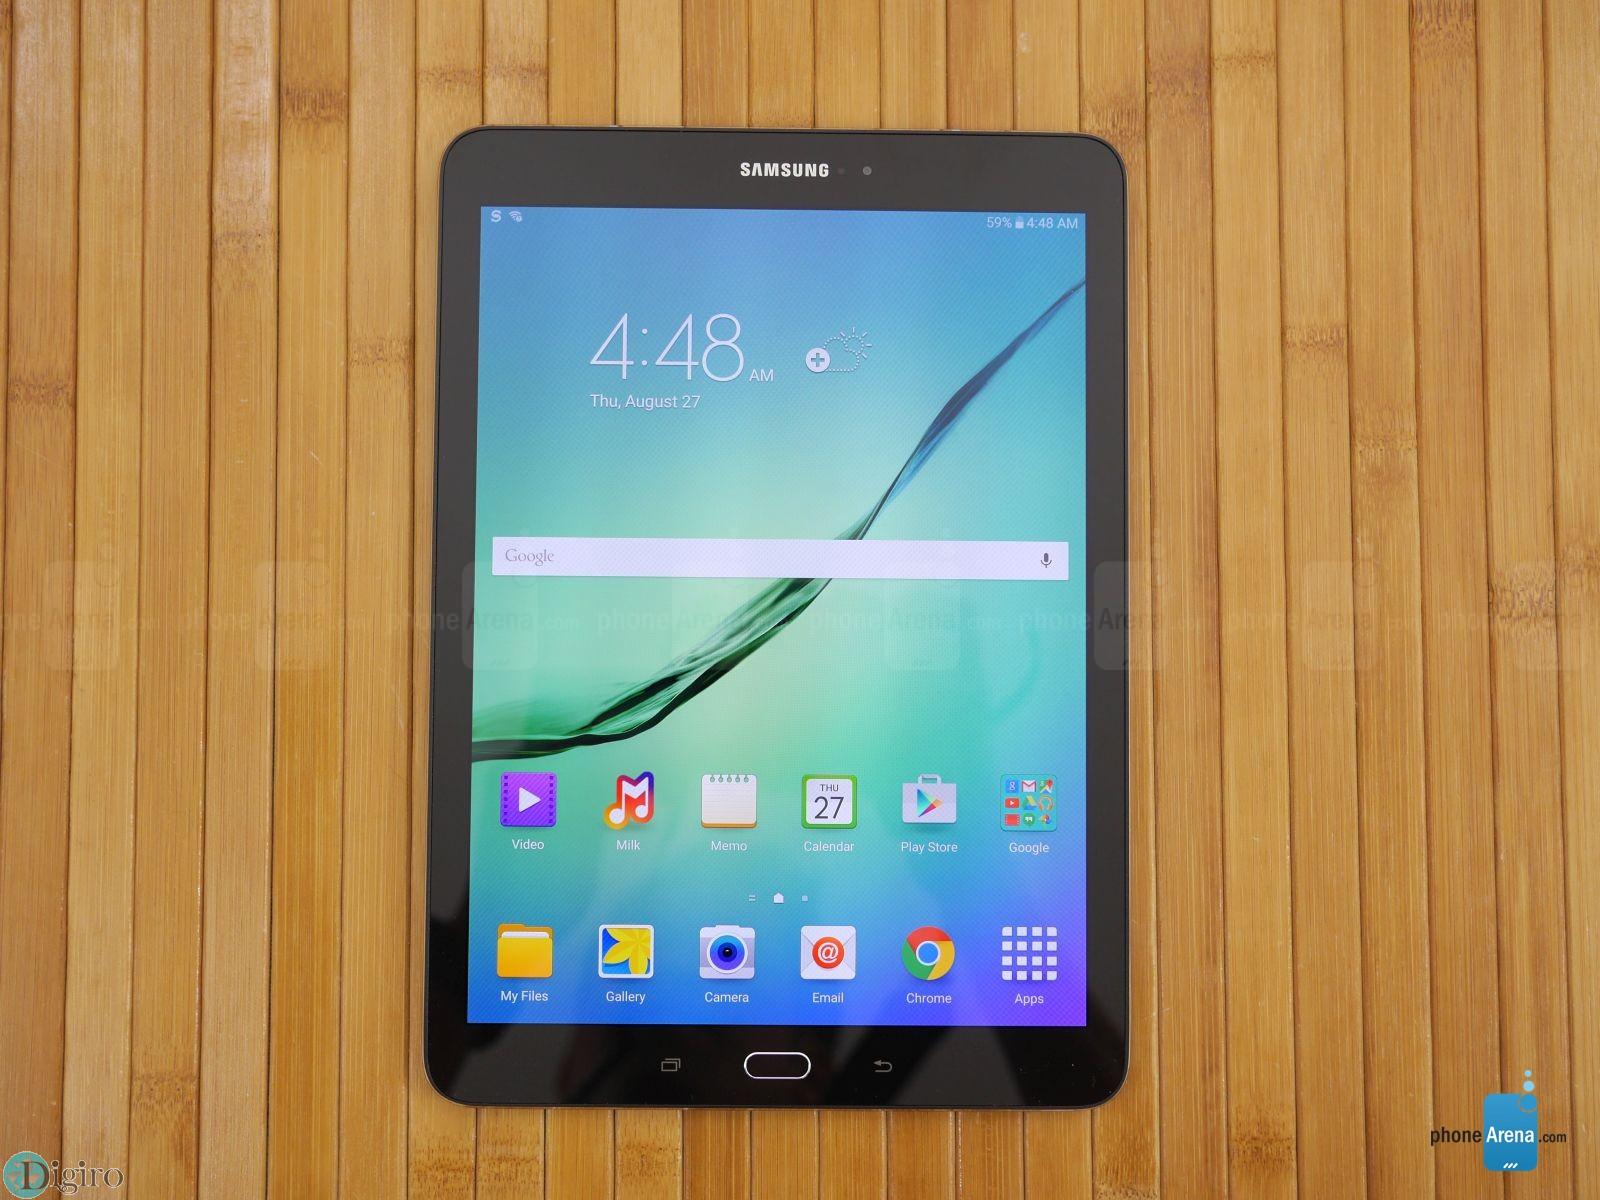 Samsung-Galaxy-Tab-S2-9.7-inch-hands-on--amp-unboxing (5)